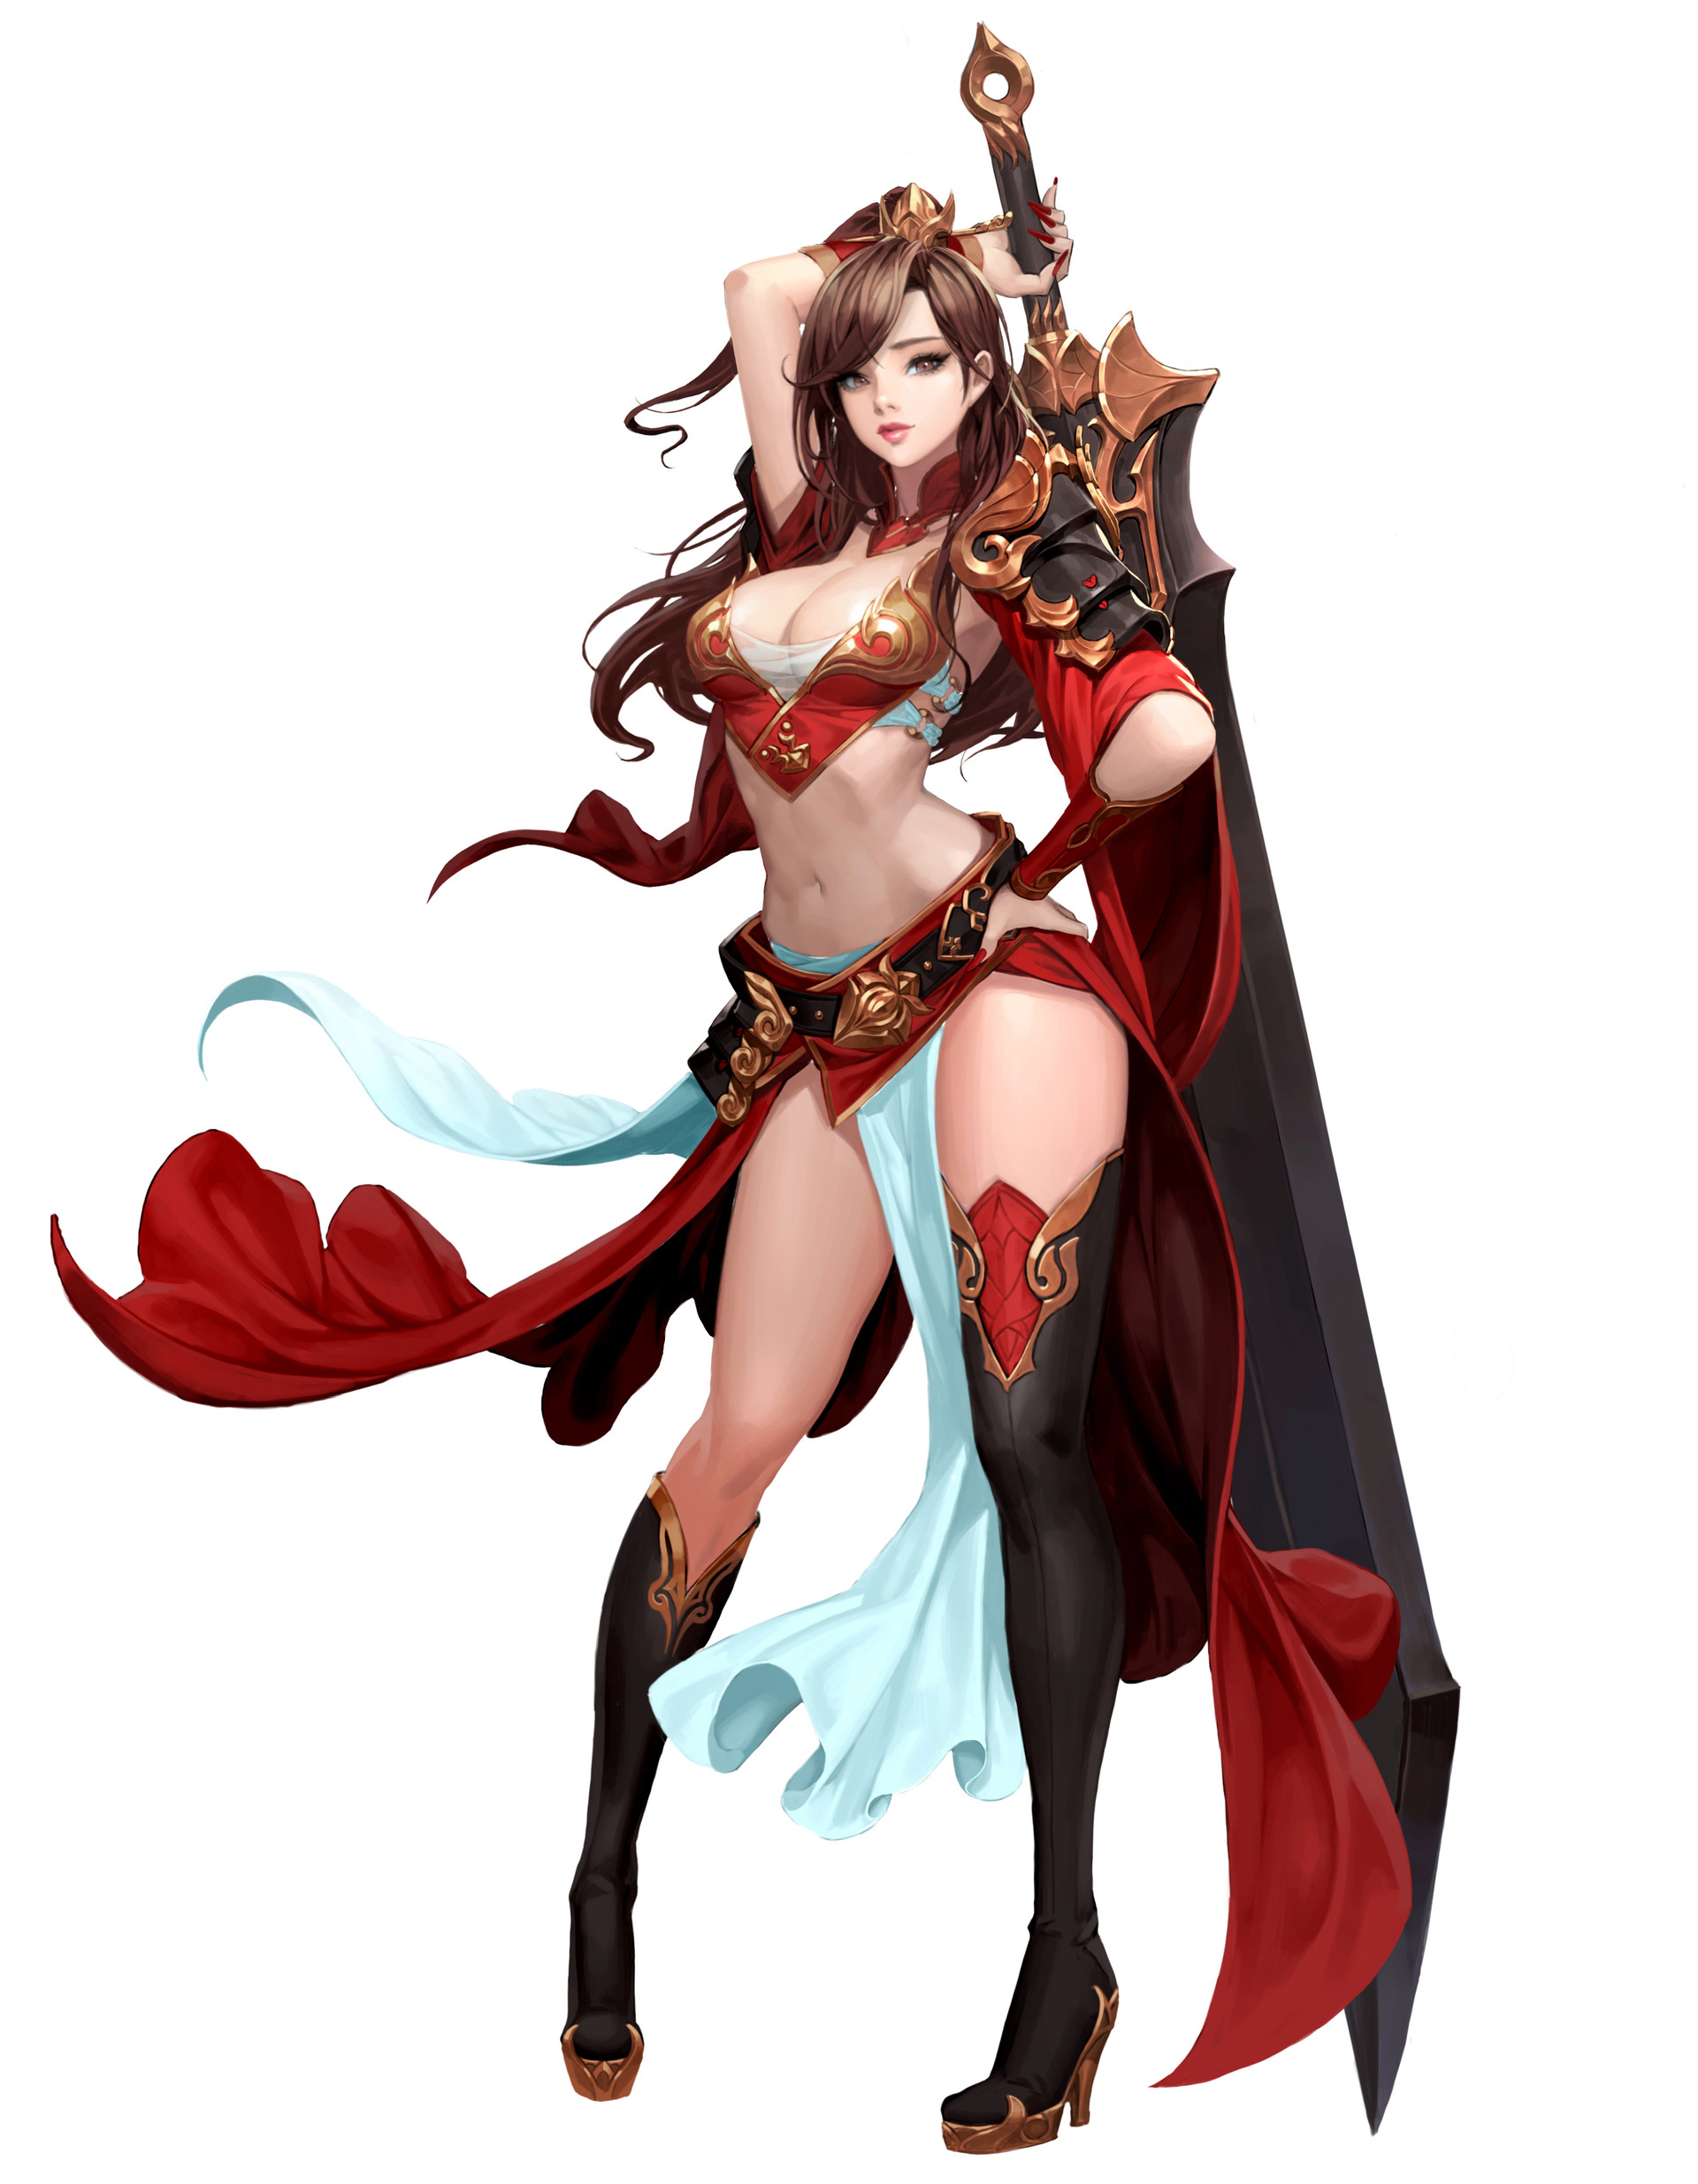 General 1920x2470 Daeho Cha drawing women brunette long hair cleavage red clothing looking at viewer weapon sword fantasy art white background